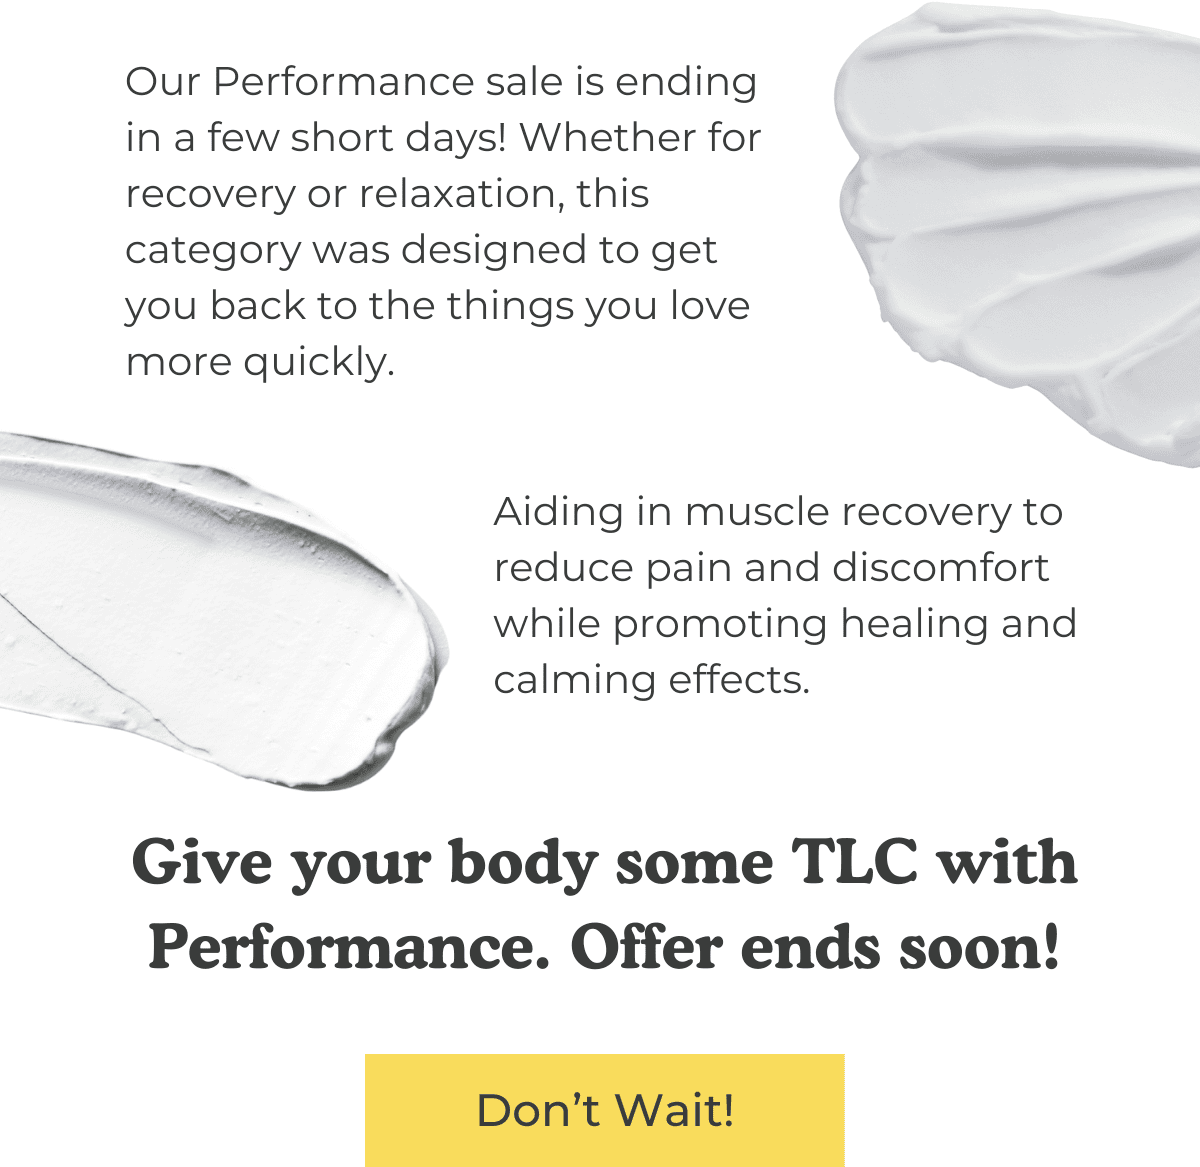 Our Performance sale is ending in a few short days! Whether for recovery or relaxation, this category was designed to get you back to the things you love more quickly. Aiding in muscle recovery to reduce pain and discomfort while promoting healing and calming effects.Give your body some TLC with Performance. Offer ends soon! DON'T WAIT!